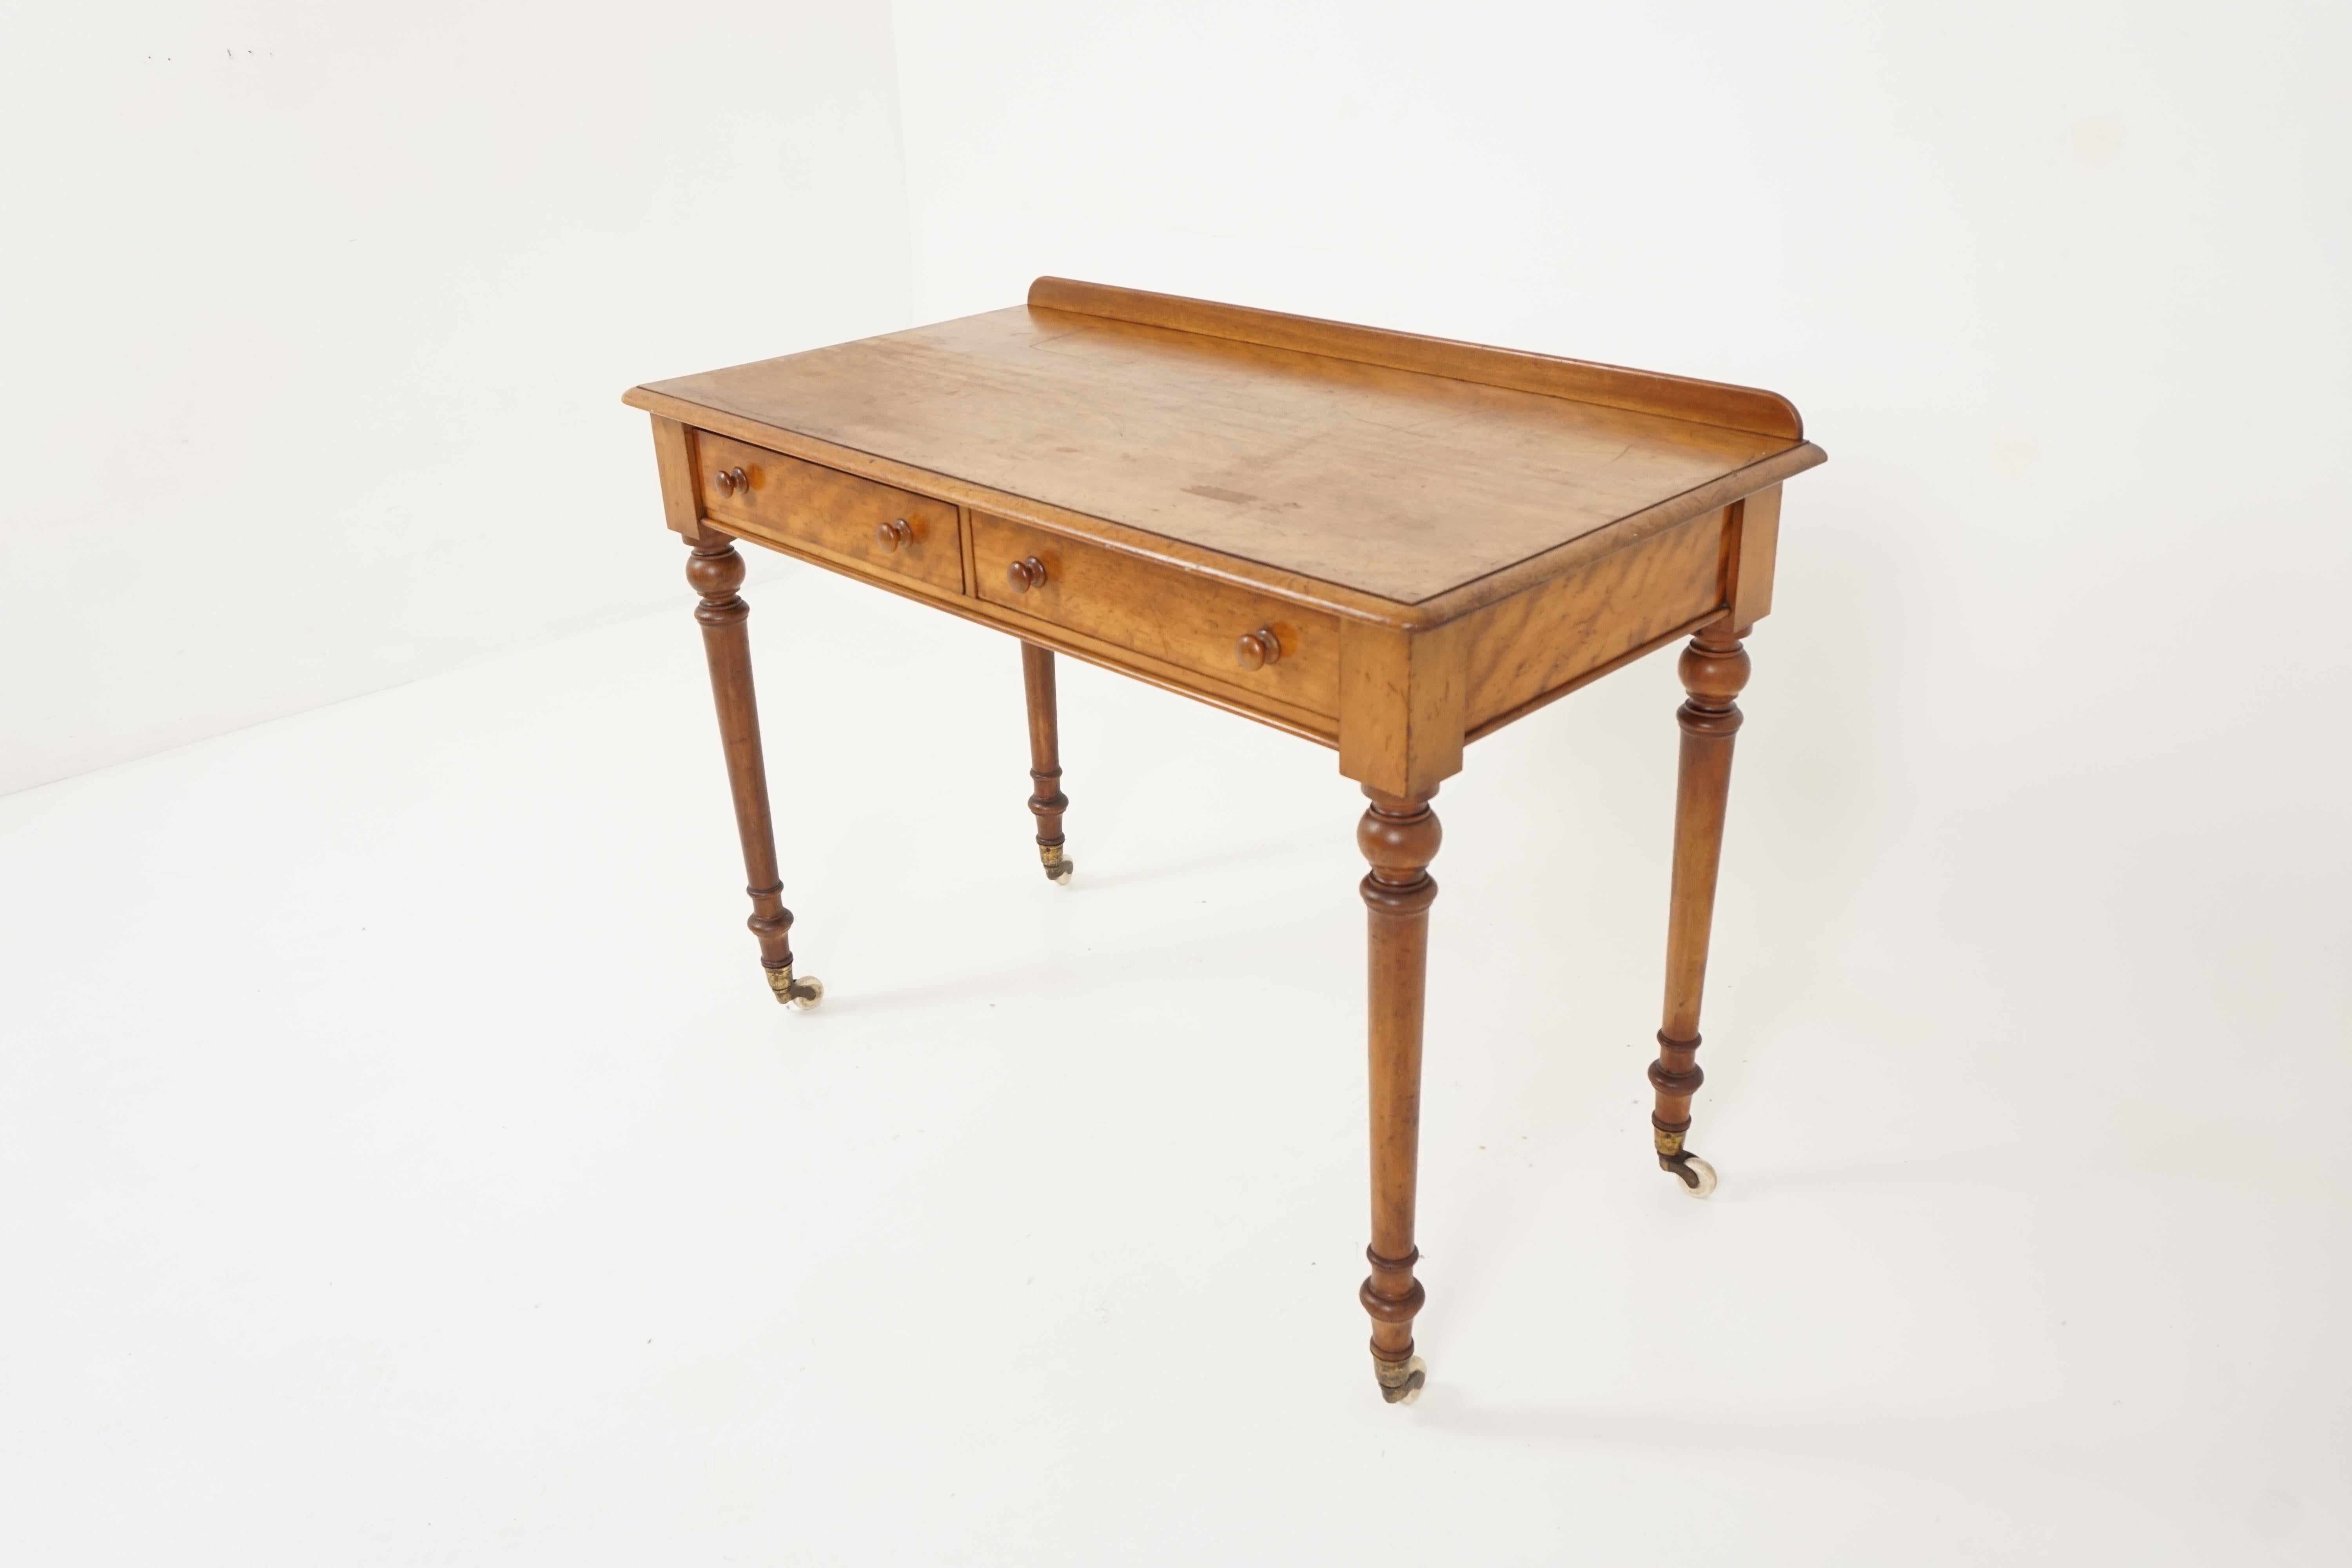 Antique Victorian writing table, writing desk, Scotland 1880, B2563

Scotland 1880
Solid birch
Original finish
Rectangular moulded top with small gallery on the back
Pair of dovetailed drawers underneath
Original wooden knobs
All standing on